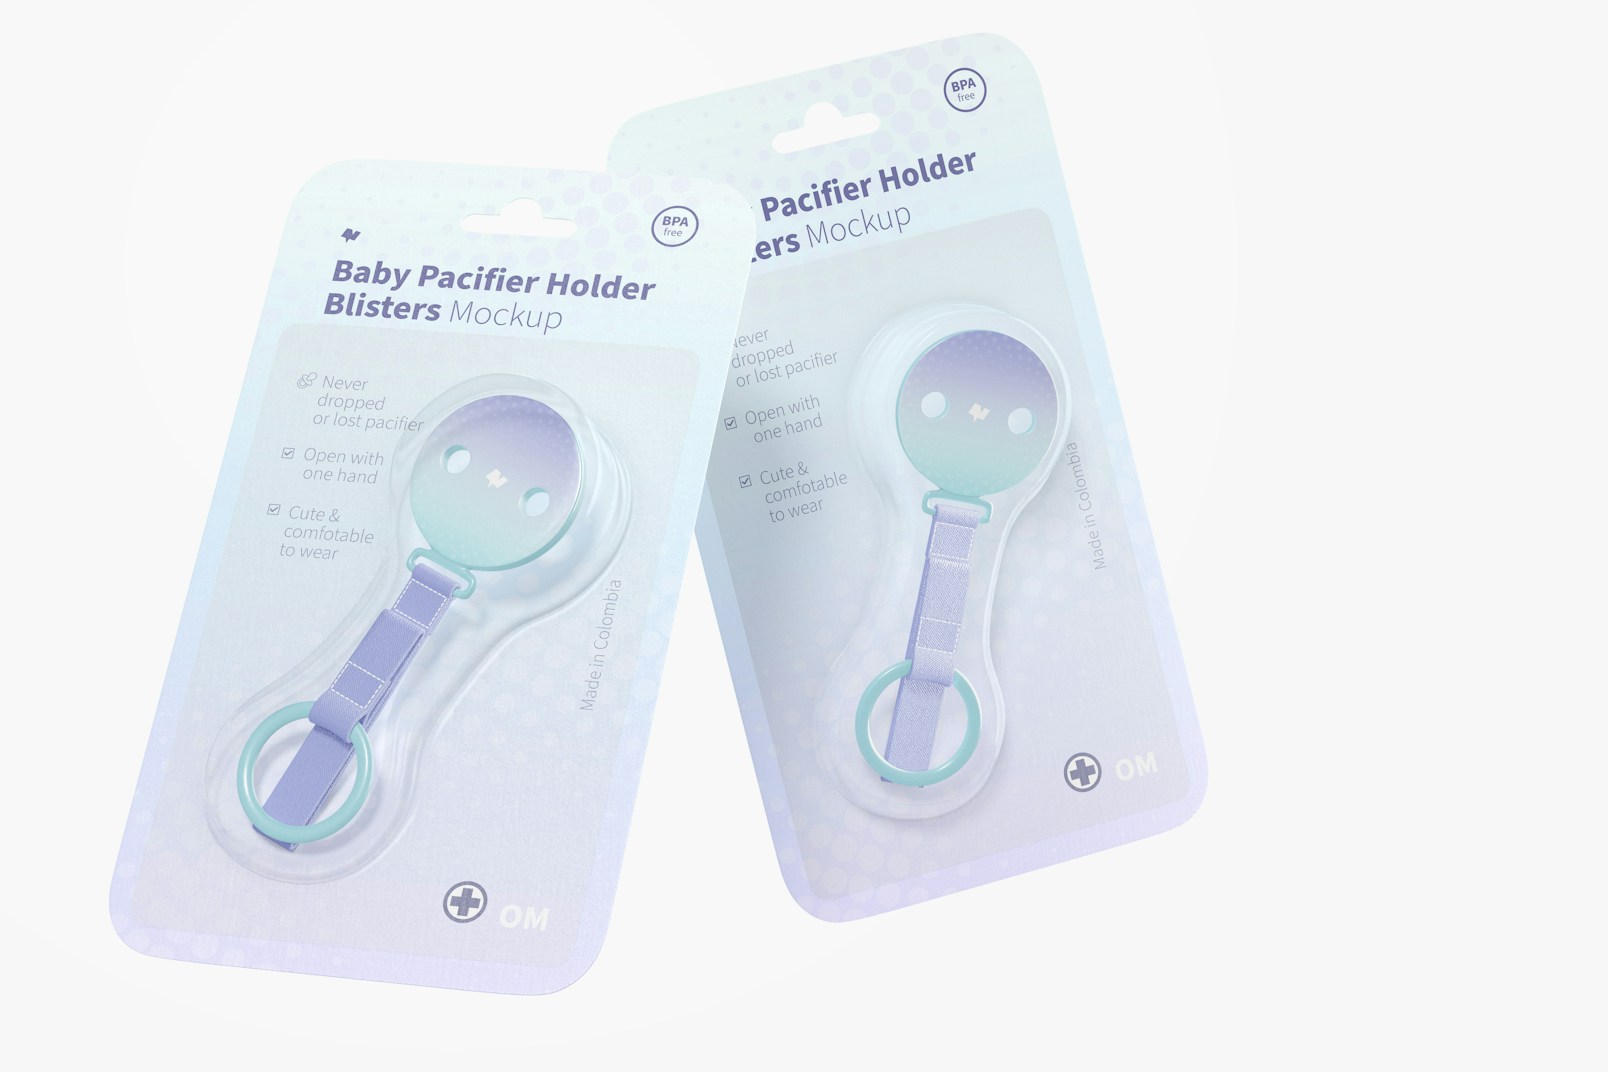 Baby Pacifier Holder Blisters Mockup, Falling